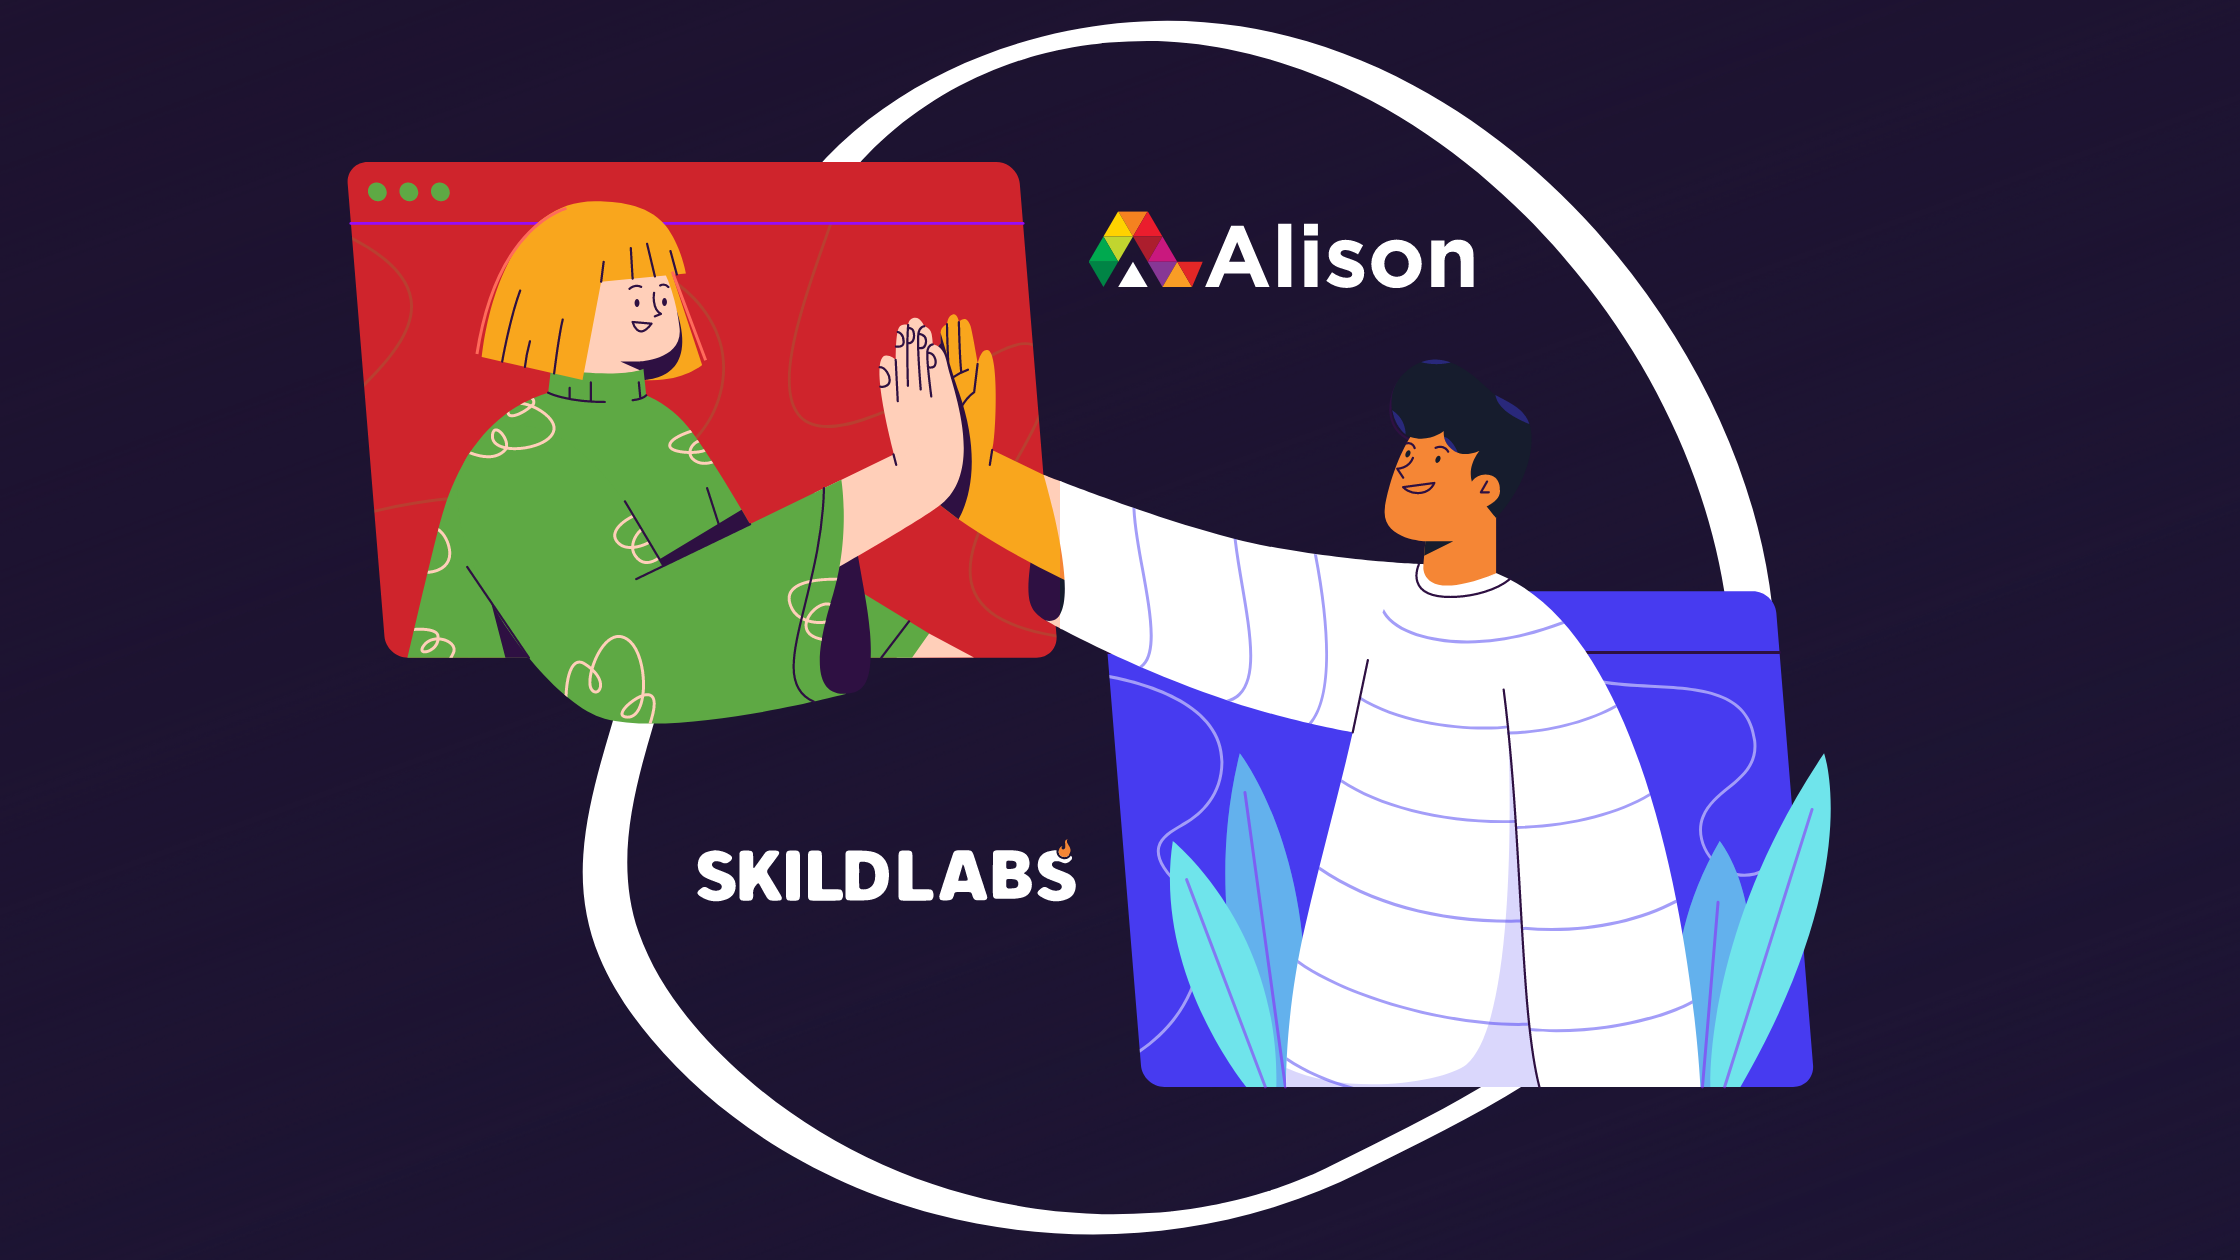 SkildLabs and Alison Partnership: Education for All!